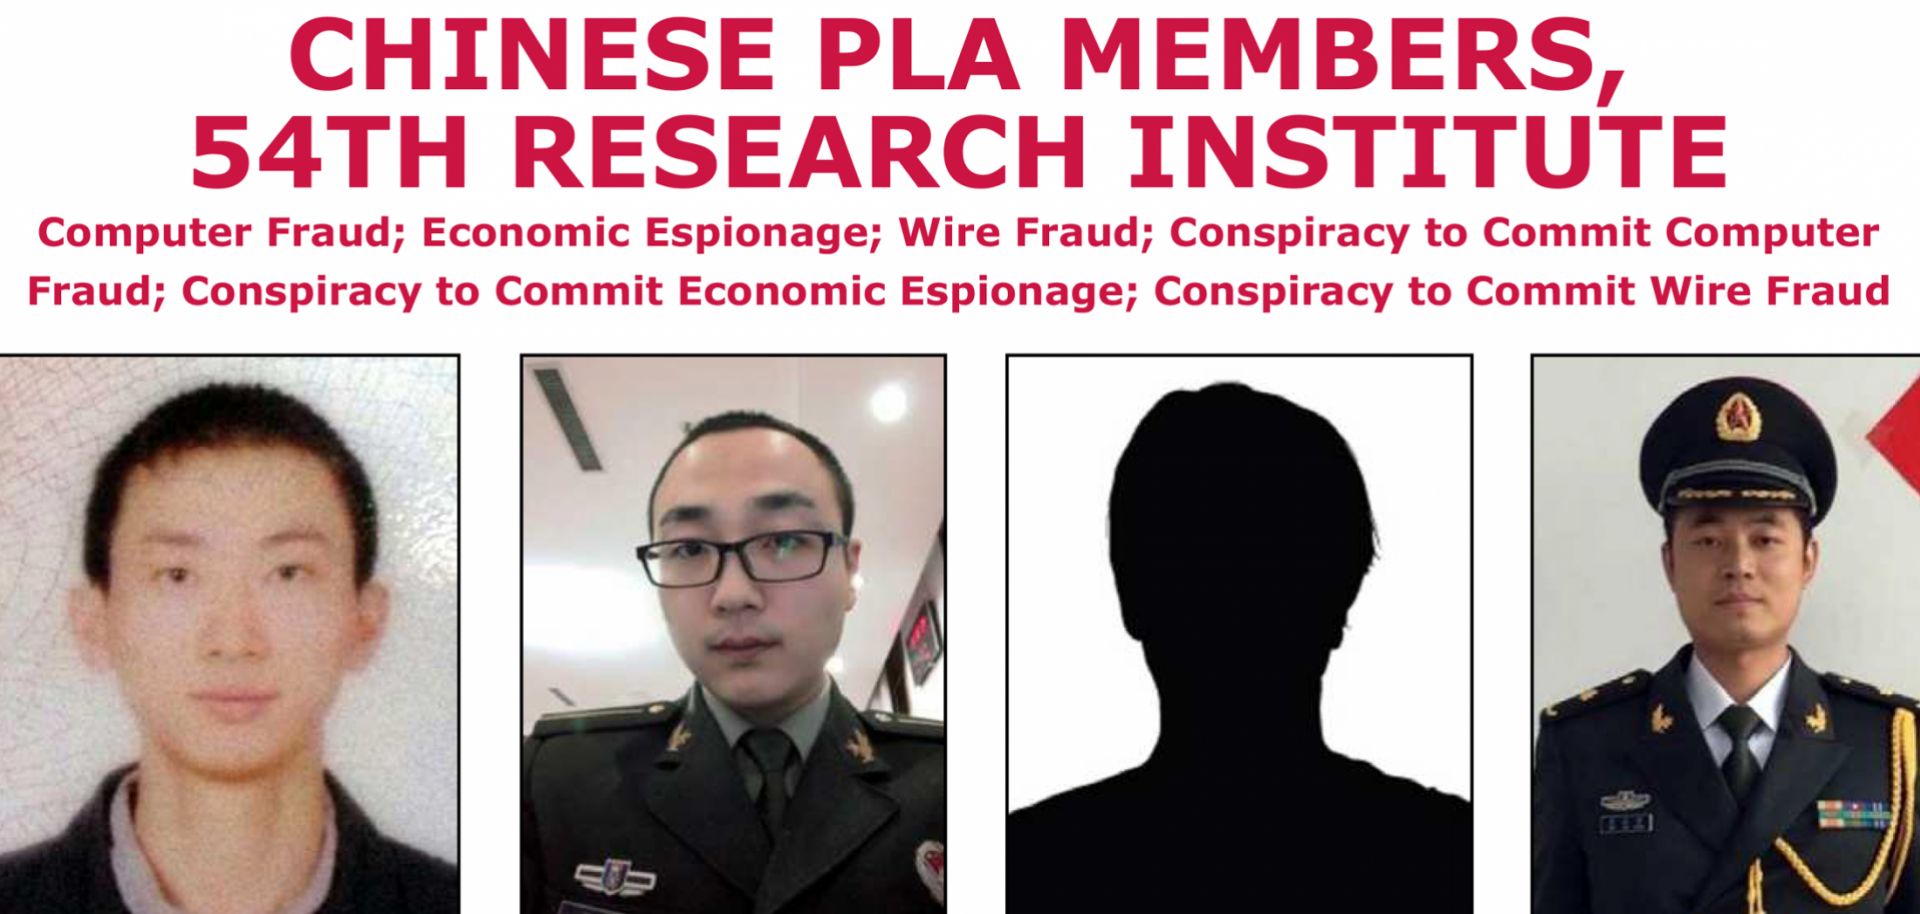 An FBI wanted poster listing four men allegedly behind the 2017 Equifax hack. The U.S. Department of Justice announced in a press release Feb. 10 that a federal grand jury in Atlanta had indicted four members of the Chinese People's Liberation Army in connection with the 2017 hack of the credit reporting agency Equifax.